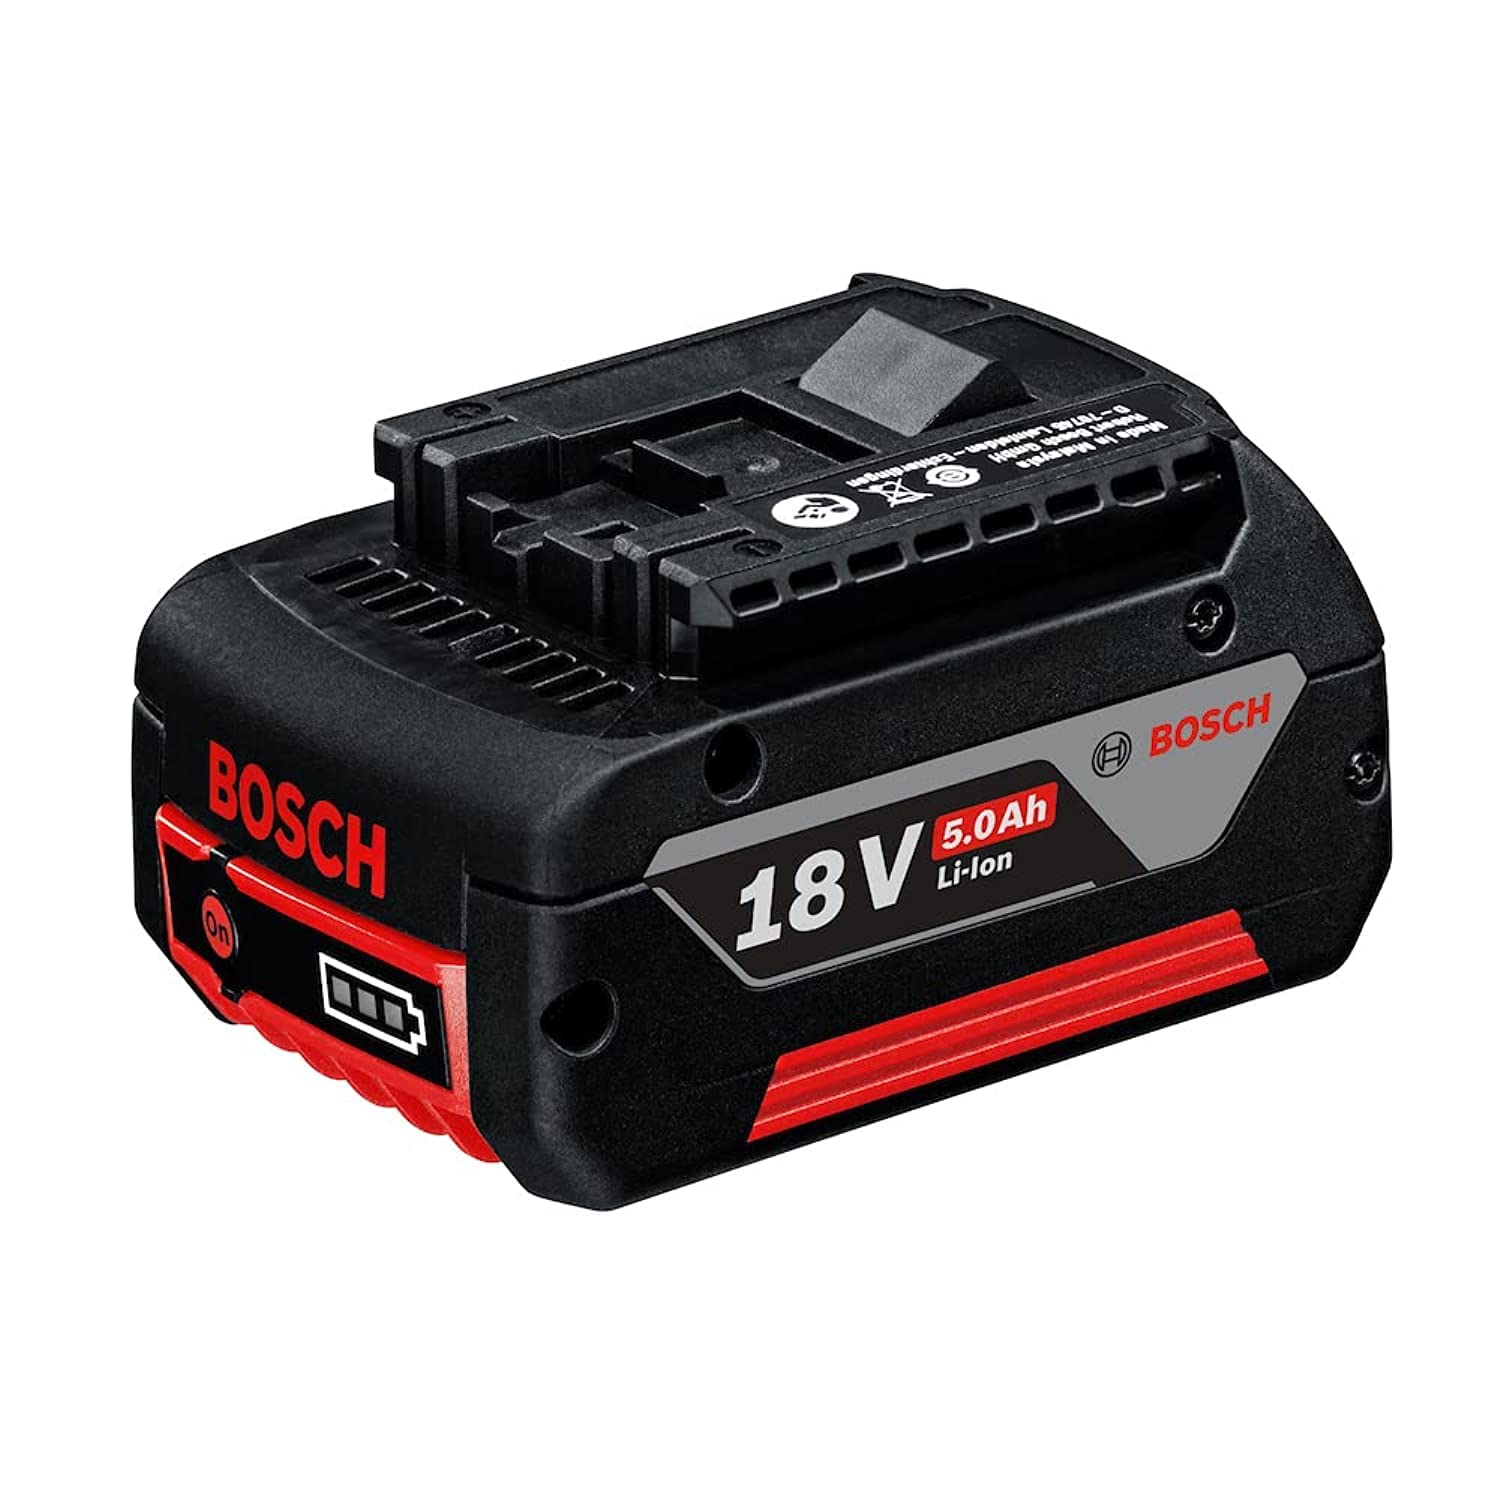 Bosch Professional Battery Pack GBA 18V 5,0 Ah 1600A001Z9 Power Tool Services